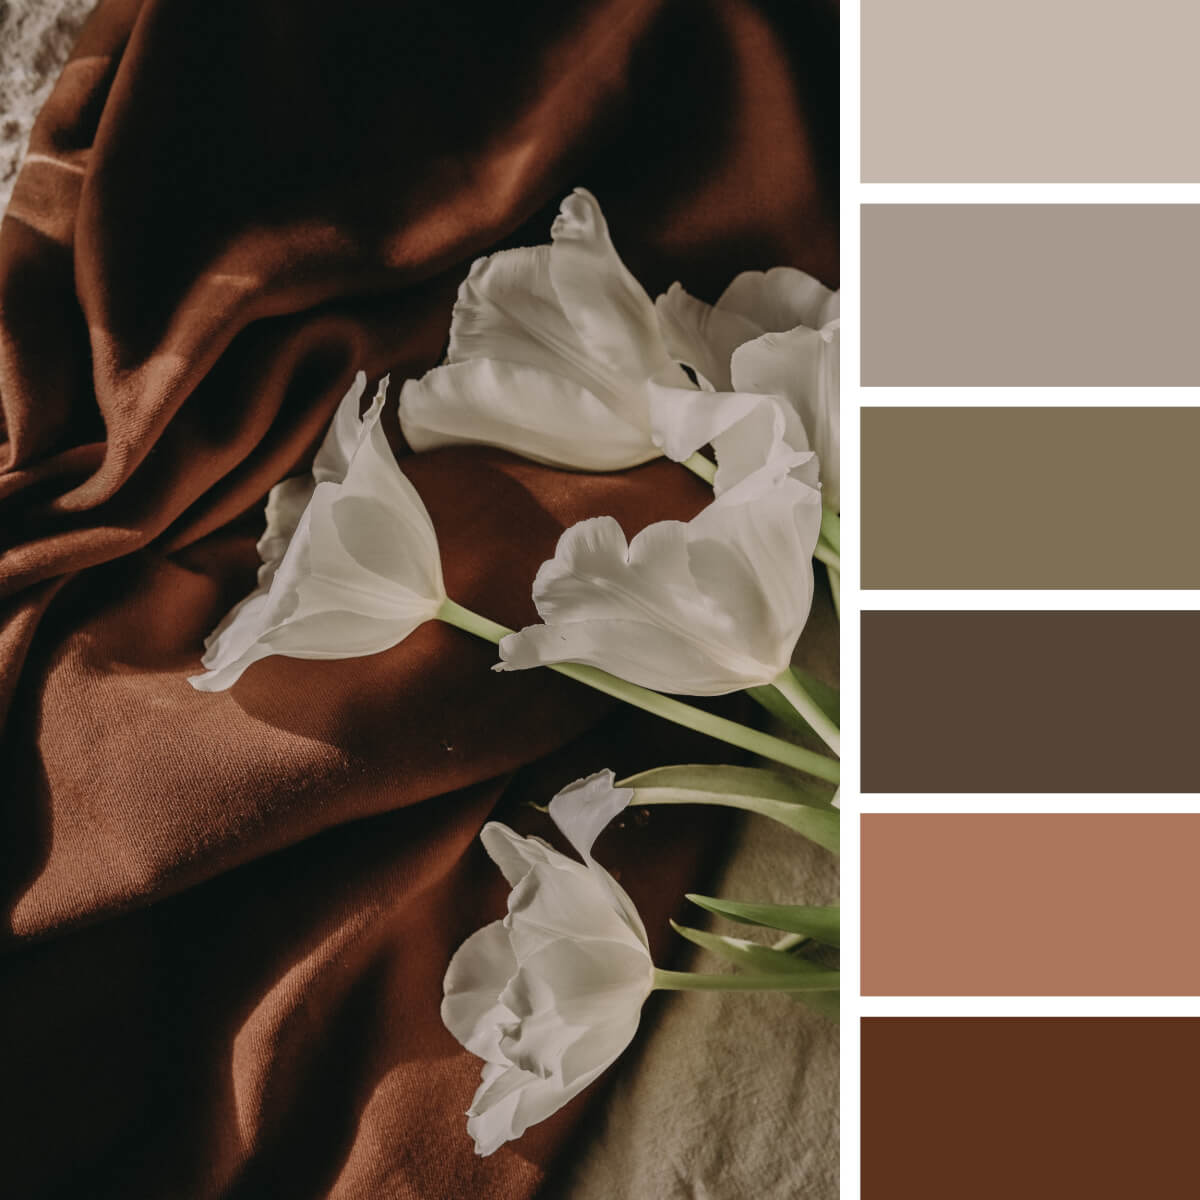 Earthly Color Palettes